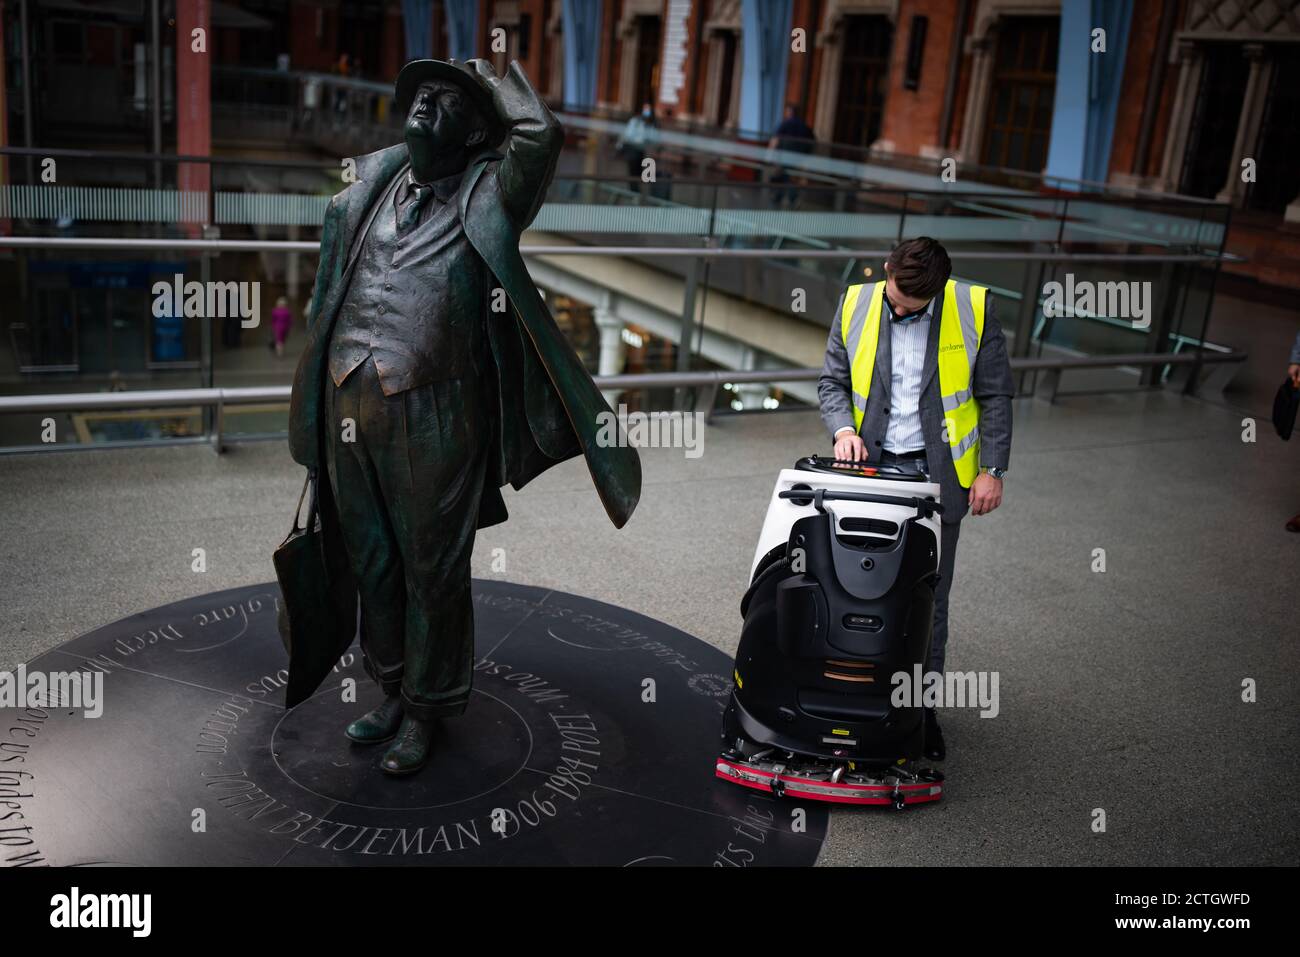 An Eco Bot 50 robot is programmed at St Pancras International, London as it is the first train station in the world to utilise high-tech cleaning robots to help eradicate viruses throughout the historical landmark's concourse and facilities. Stock Photo